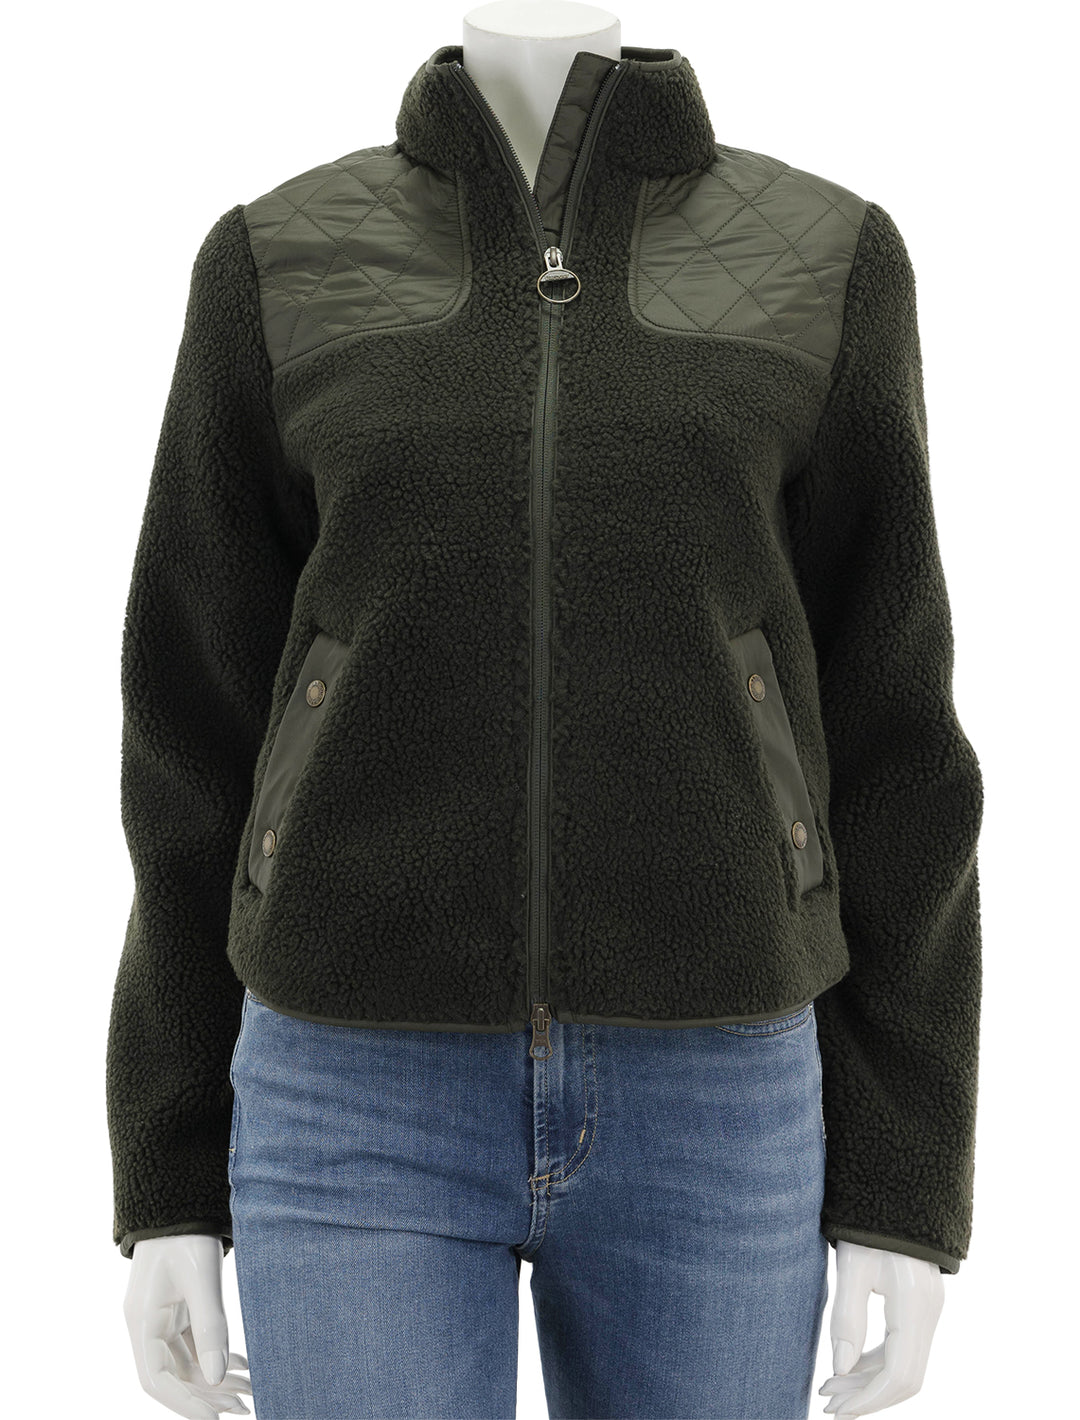 Front view of Barbour's rockling fleece in olive, zipped.